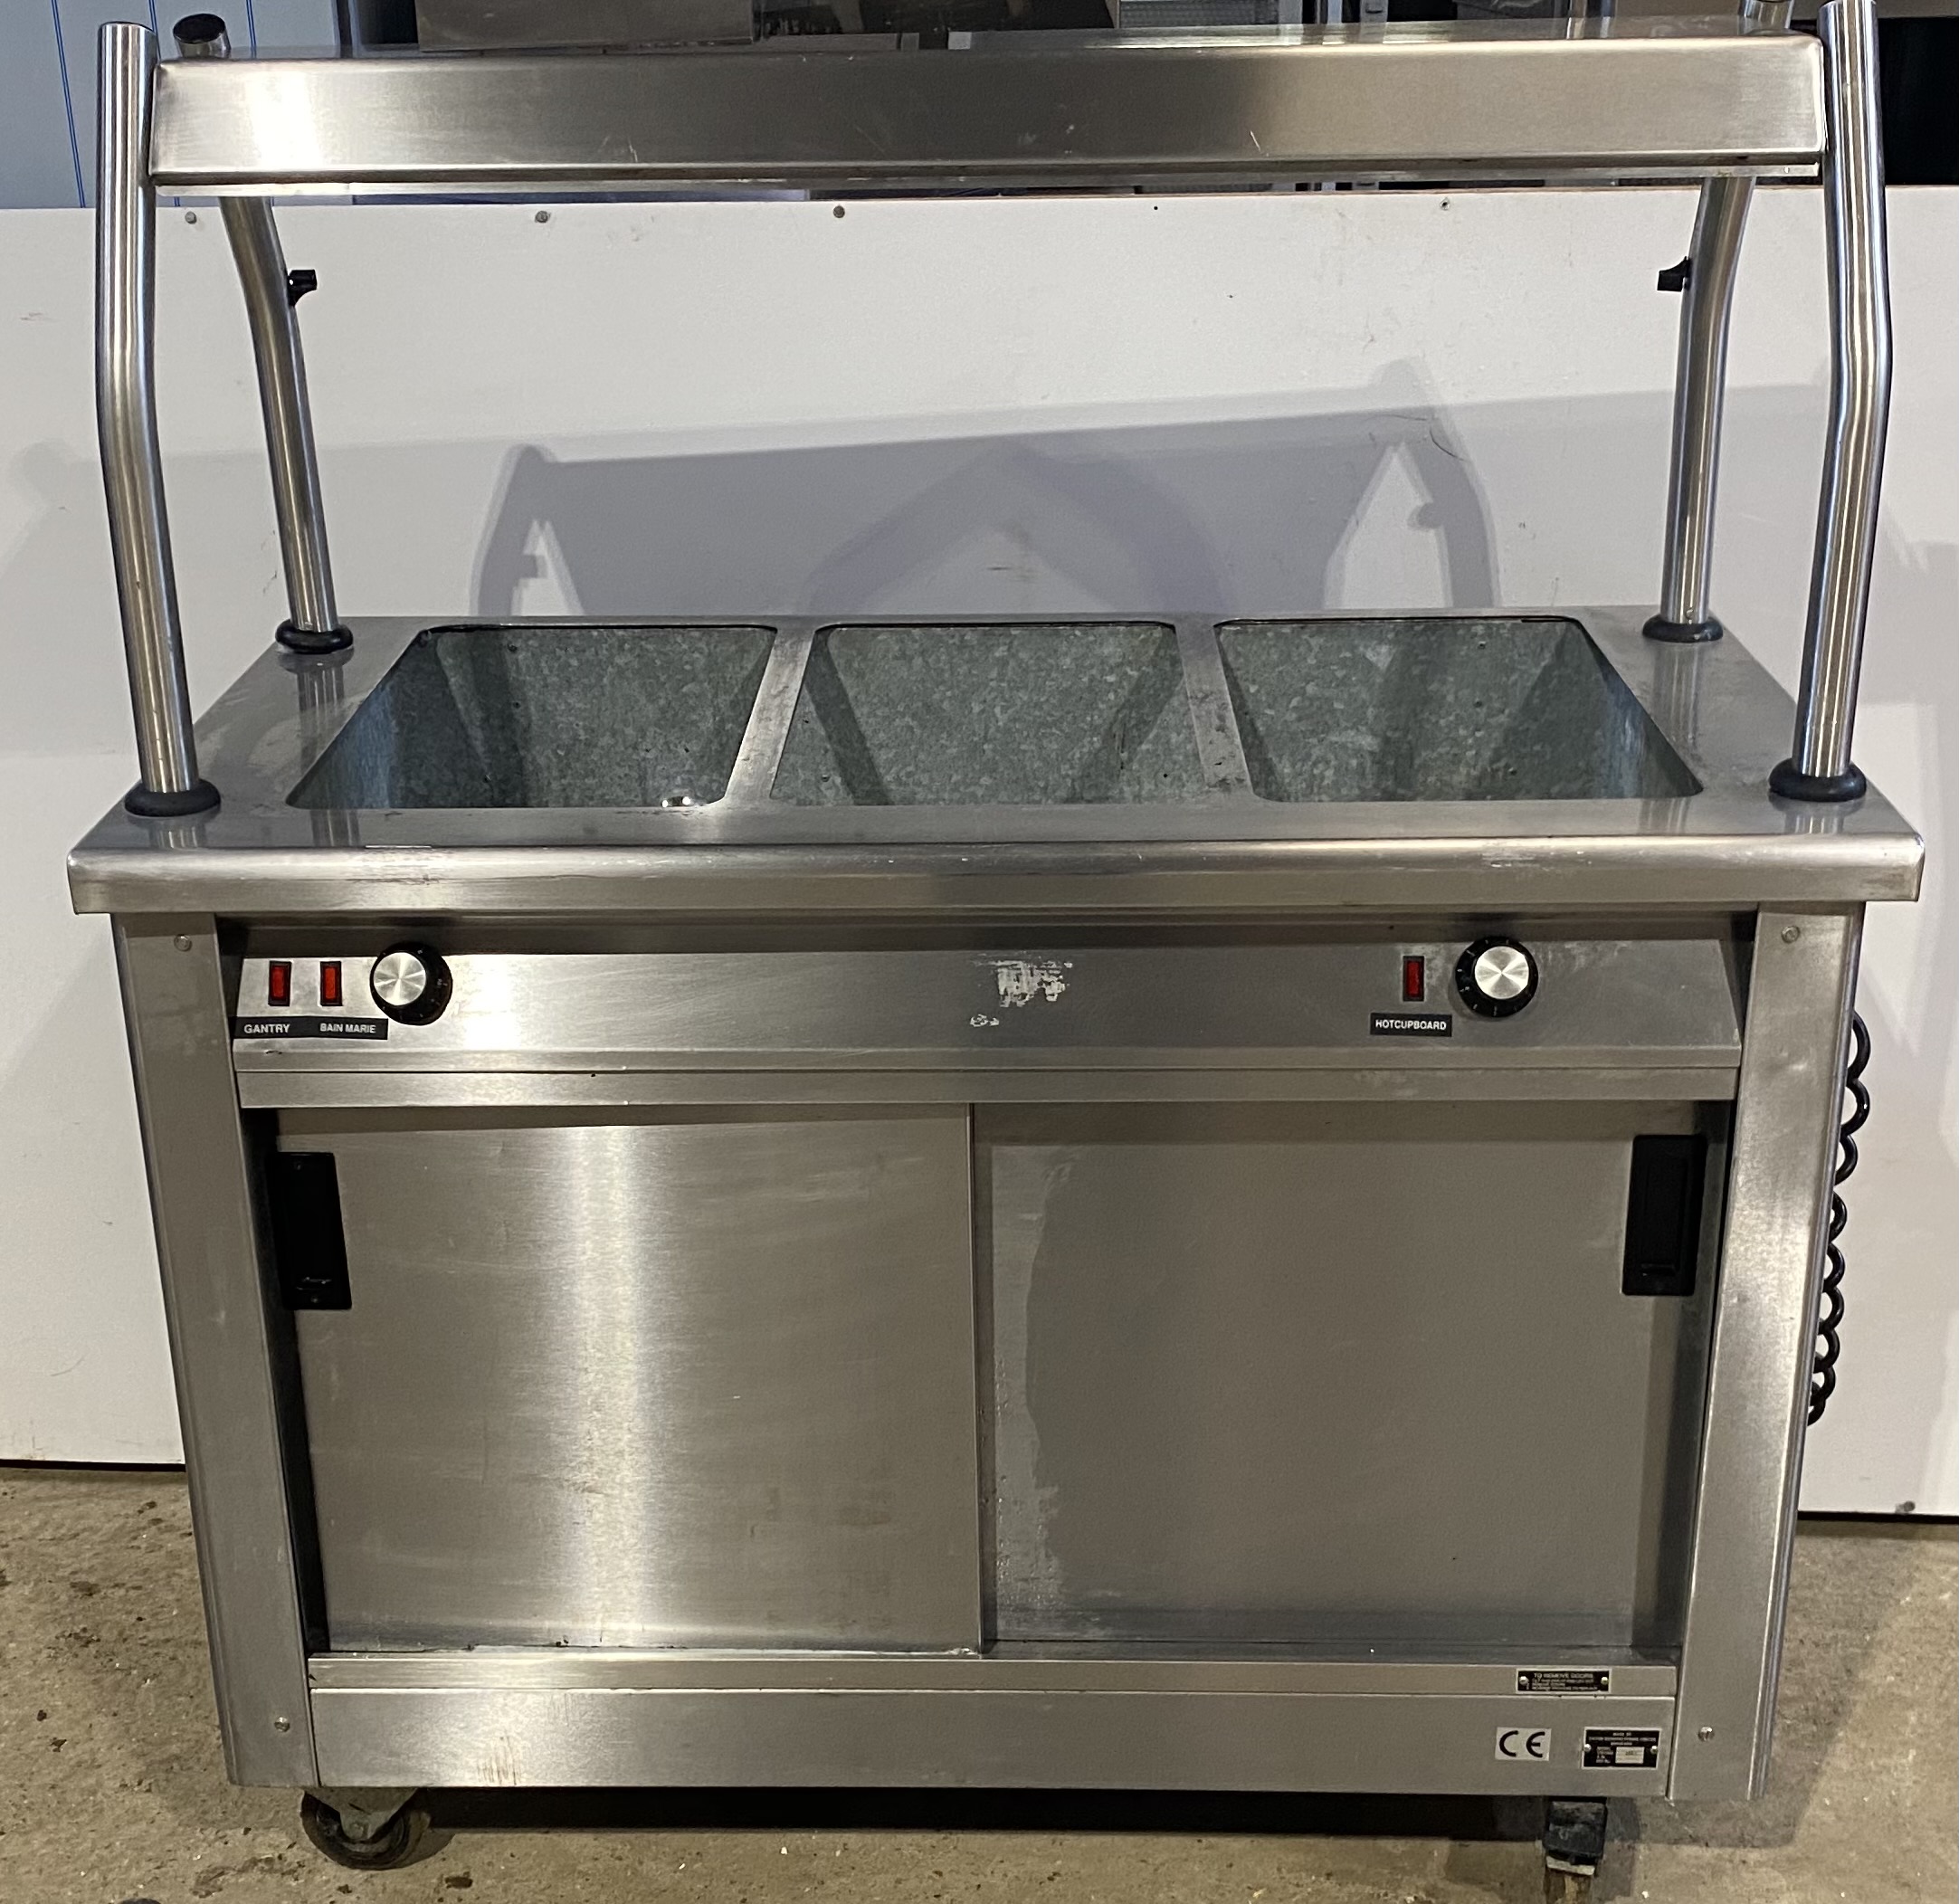 VICTOR Hot Cupboard With 3 Well Bain Marie